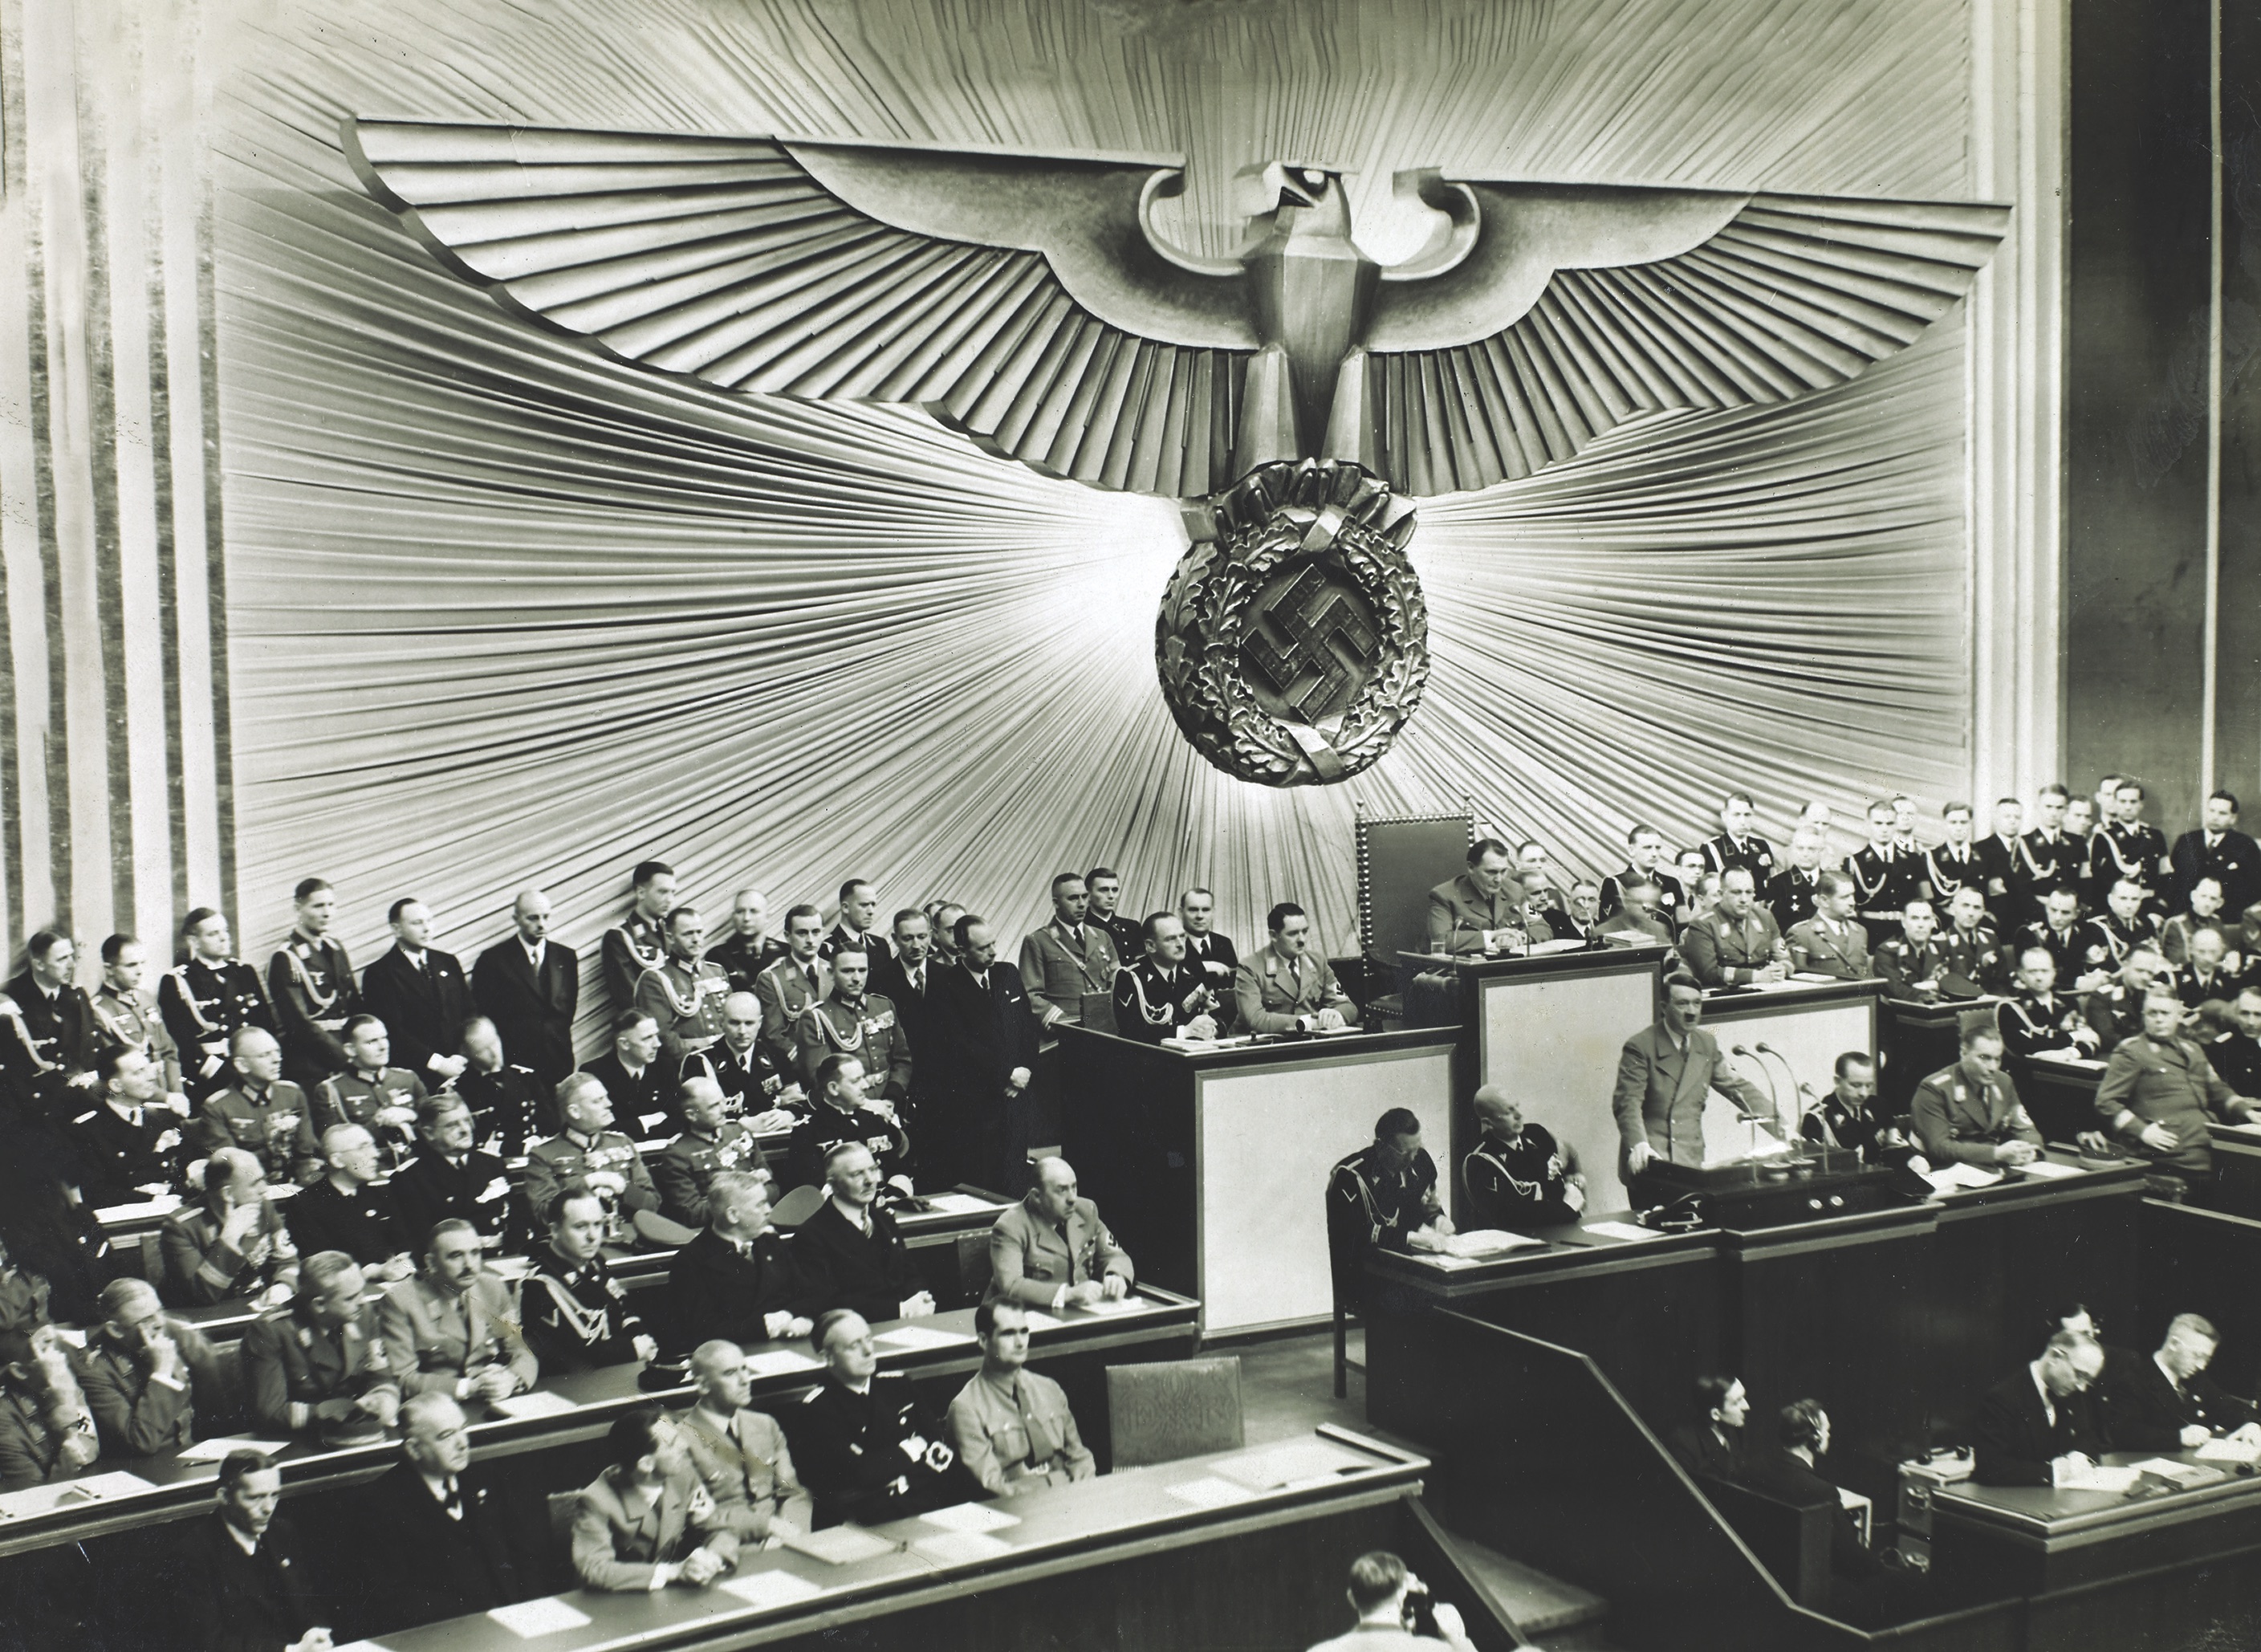 In this speech to the Reichstag on January 30, 1939, German chancellor Adolf Hitler, casting himself as a prophet, warned that another world war would result inâ€œthe annihilation of the Jewish race in Europe.â€ (Arquivo Nacional Collection, Brazil)